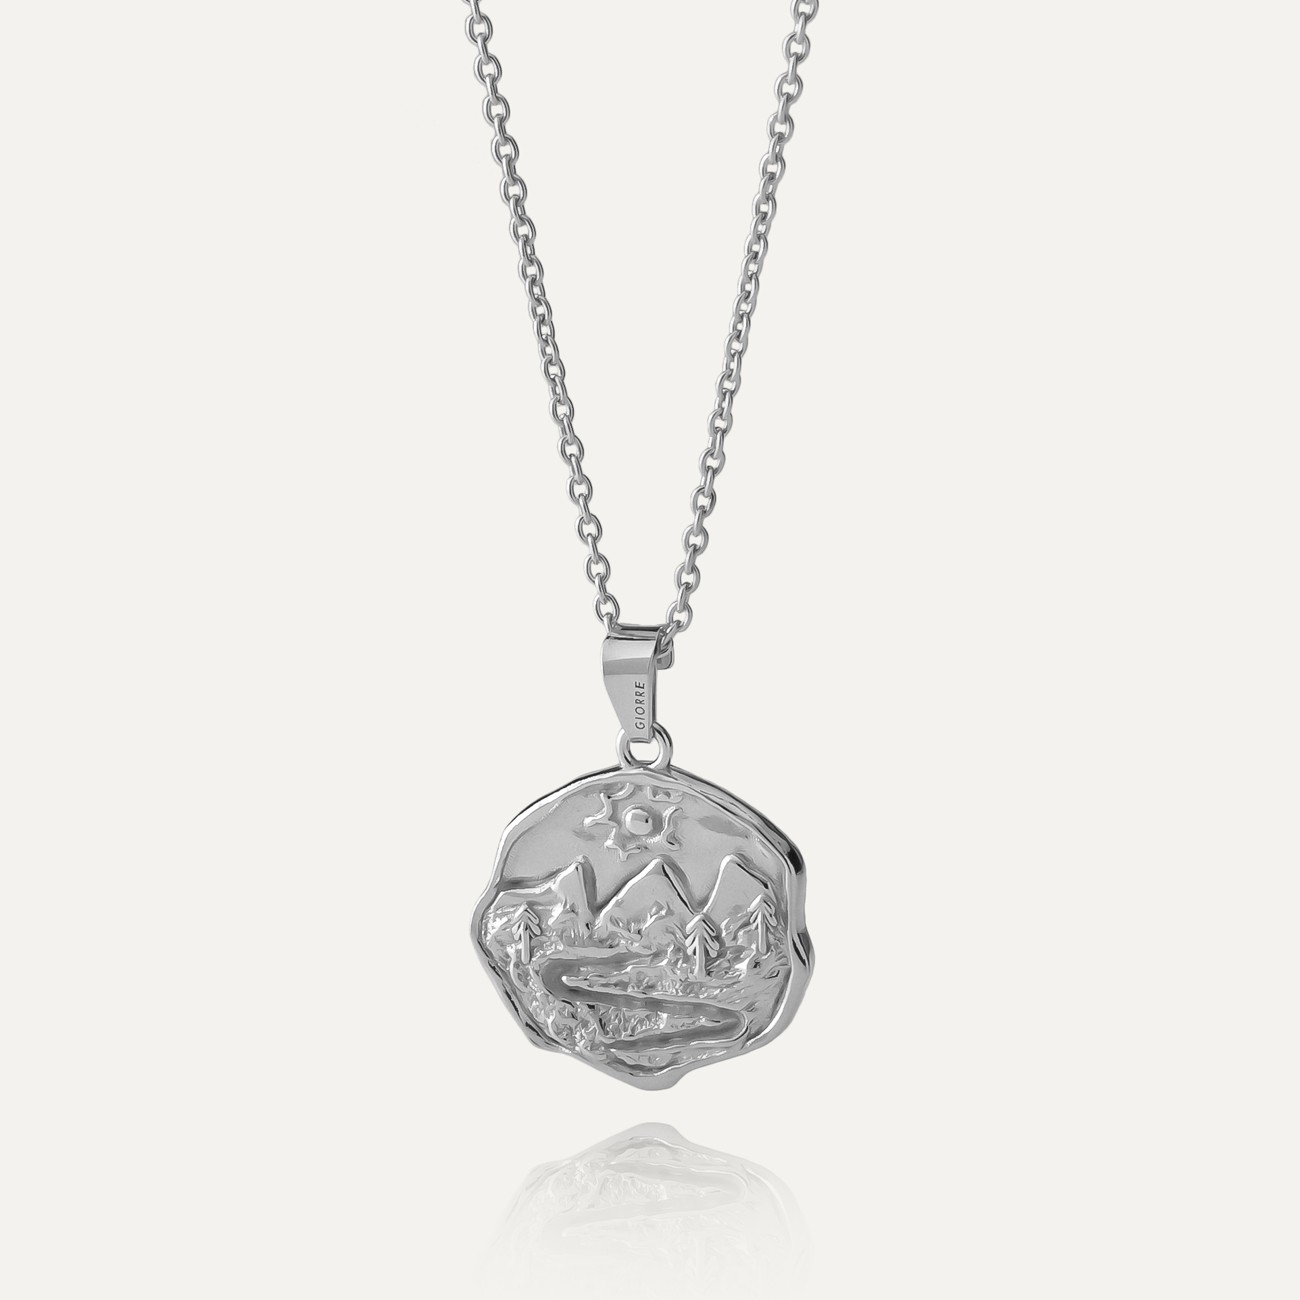 Mountain talisman necklace, sterling silver 925